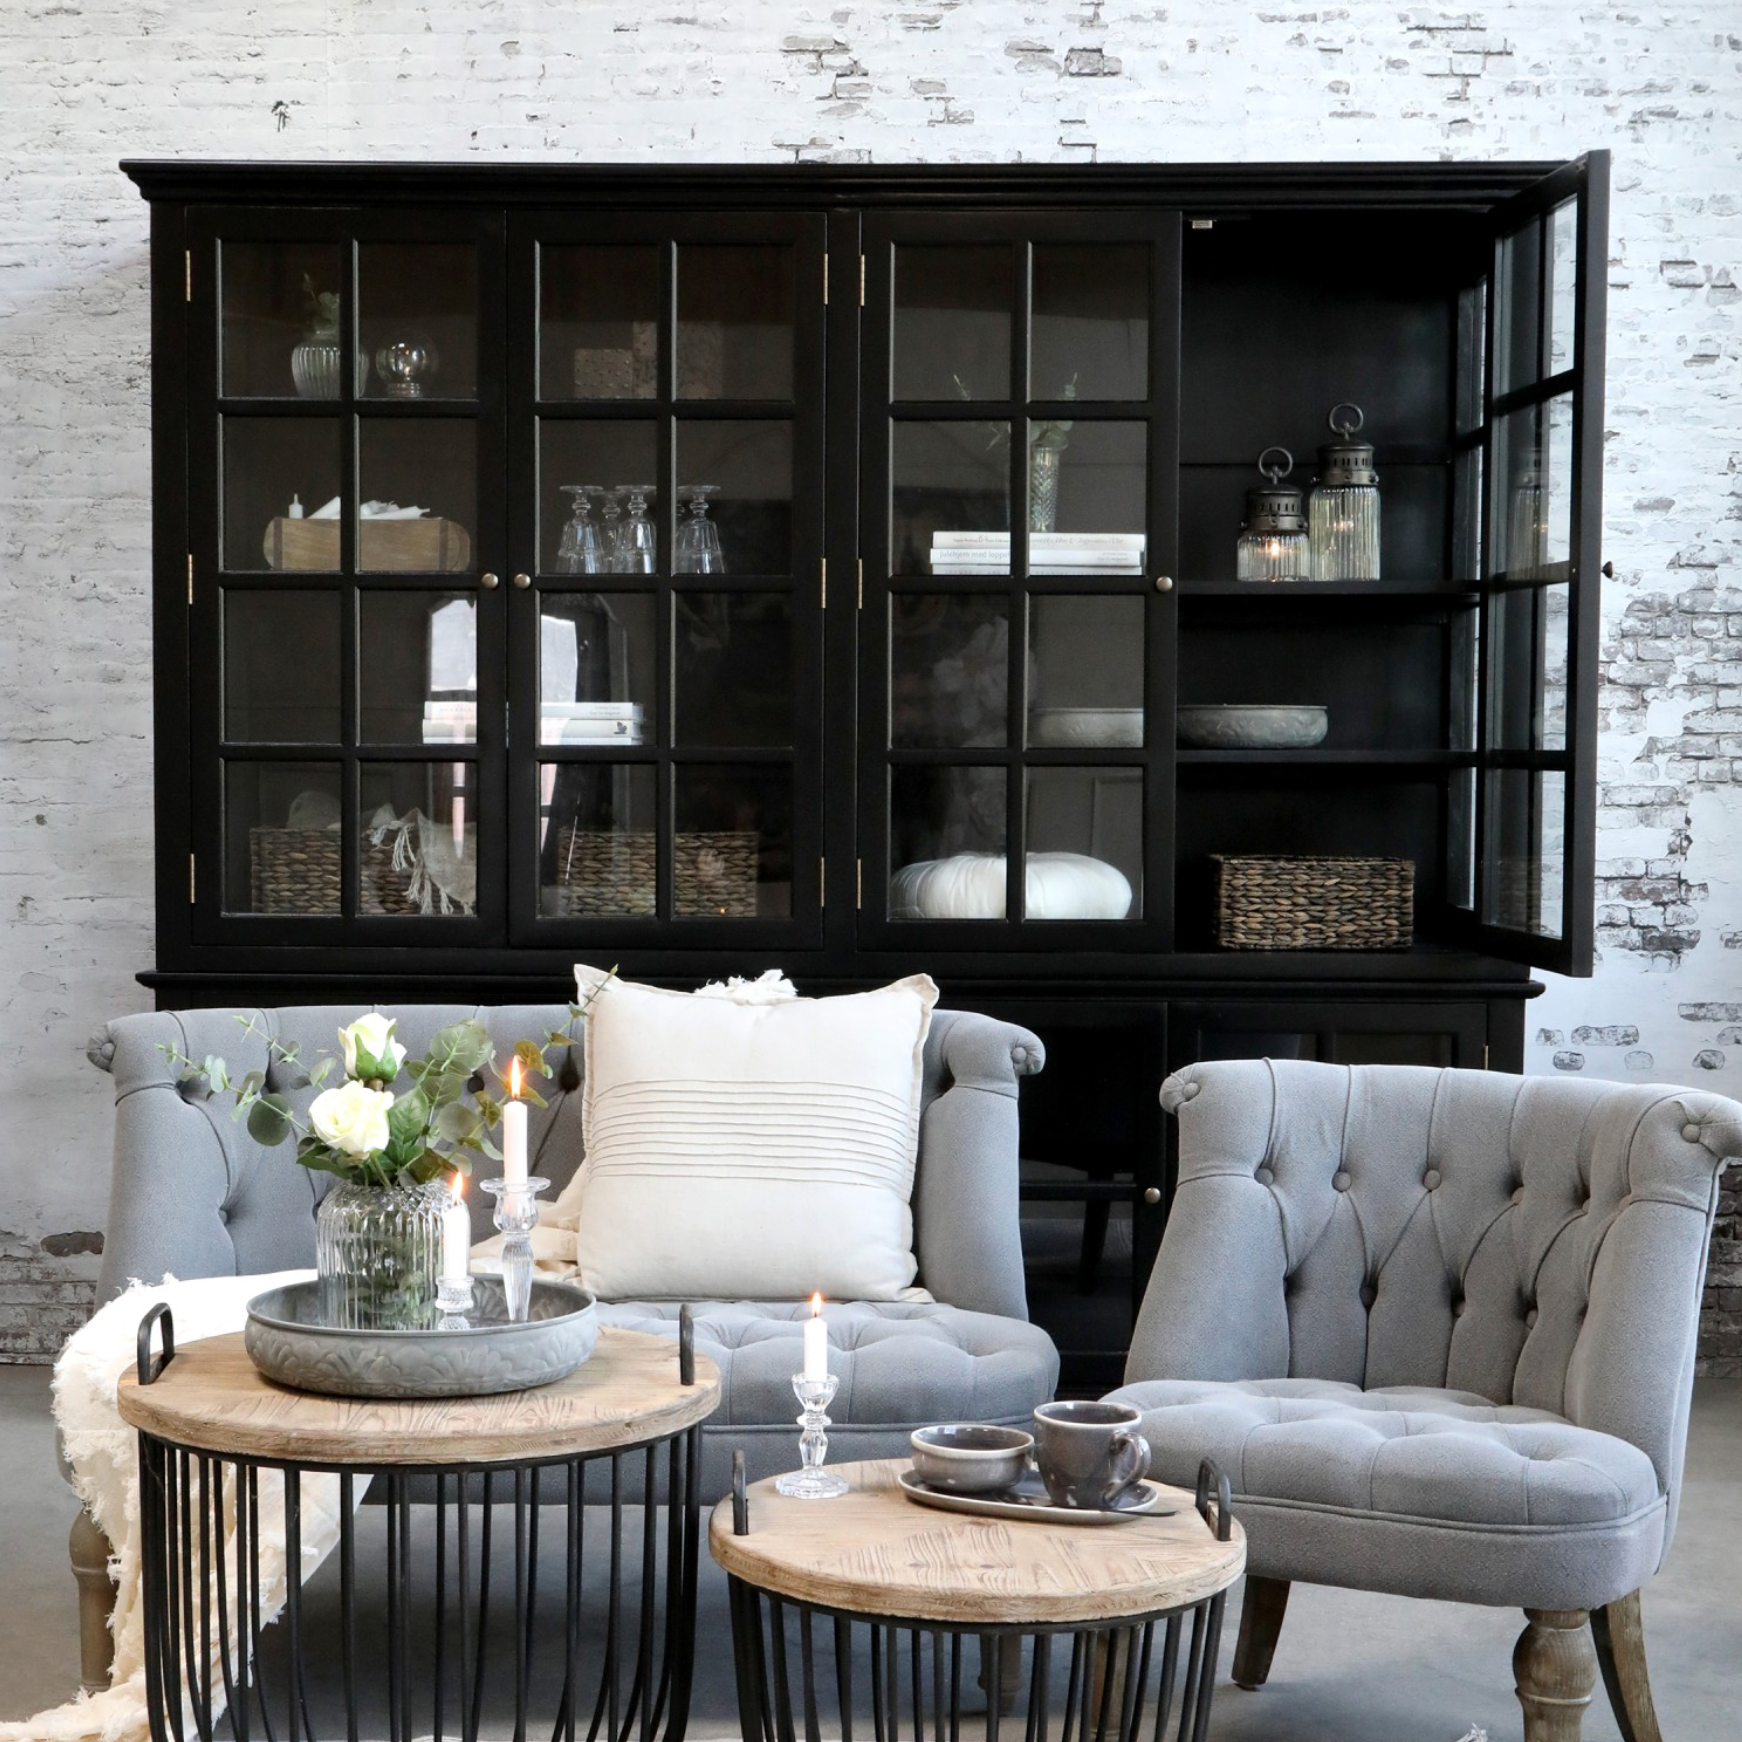 a relaxed seating area with large black armoire in background.